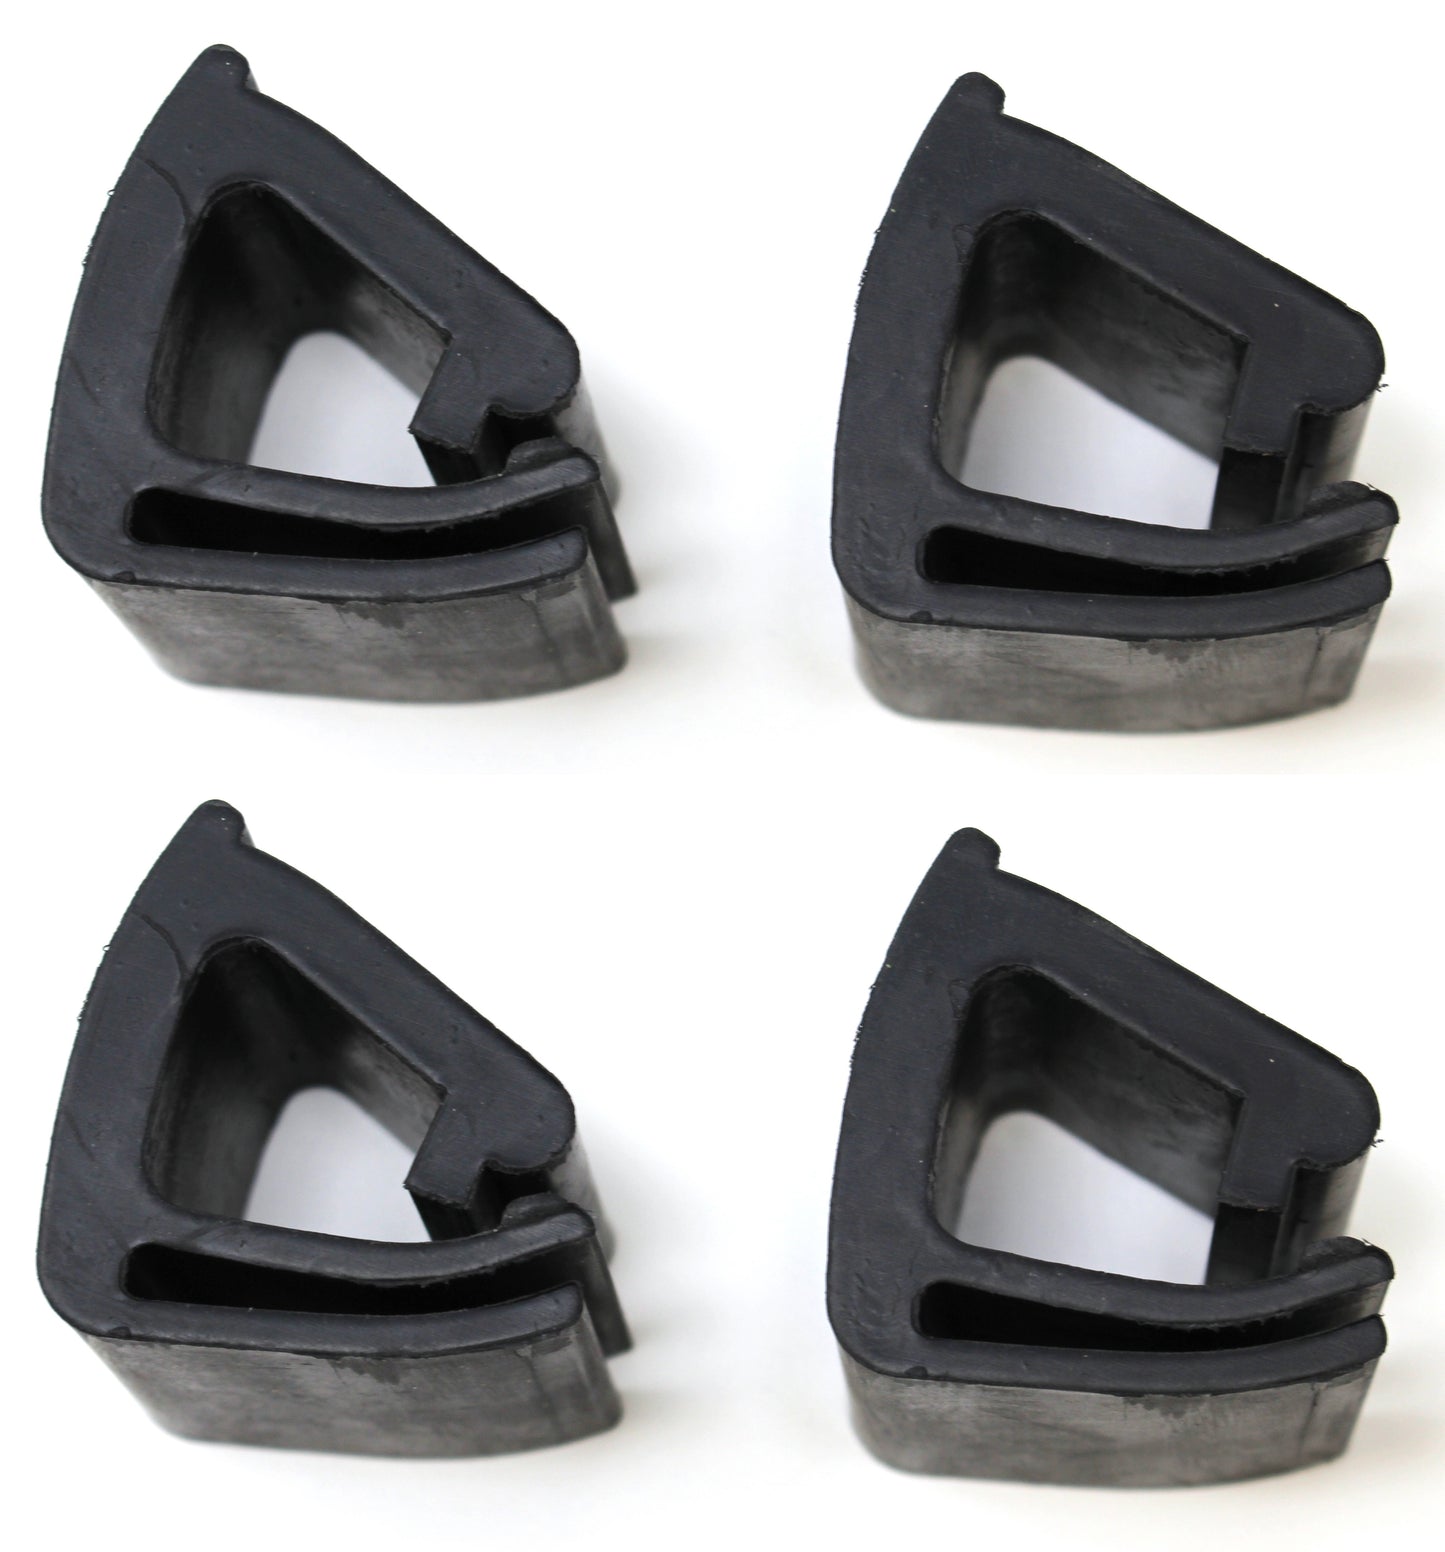 JSP Manufacturing Golf Cart Windshield Retaining Clips Replaces Club Car 102005801 1020058-01